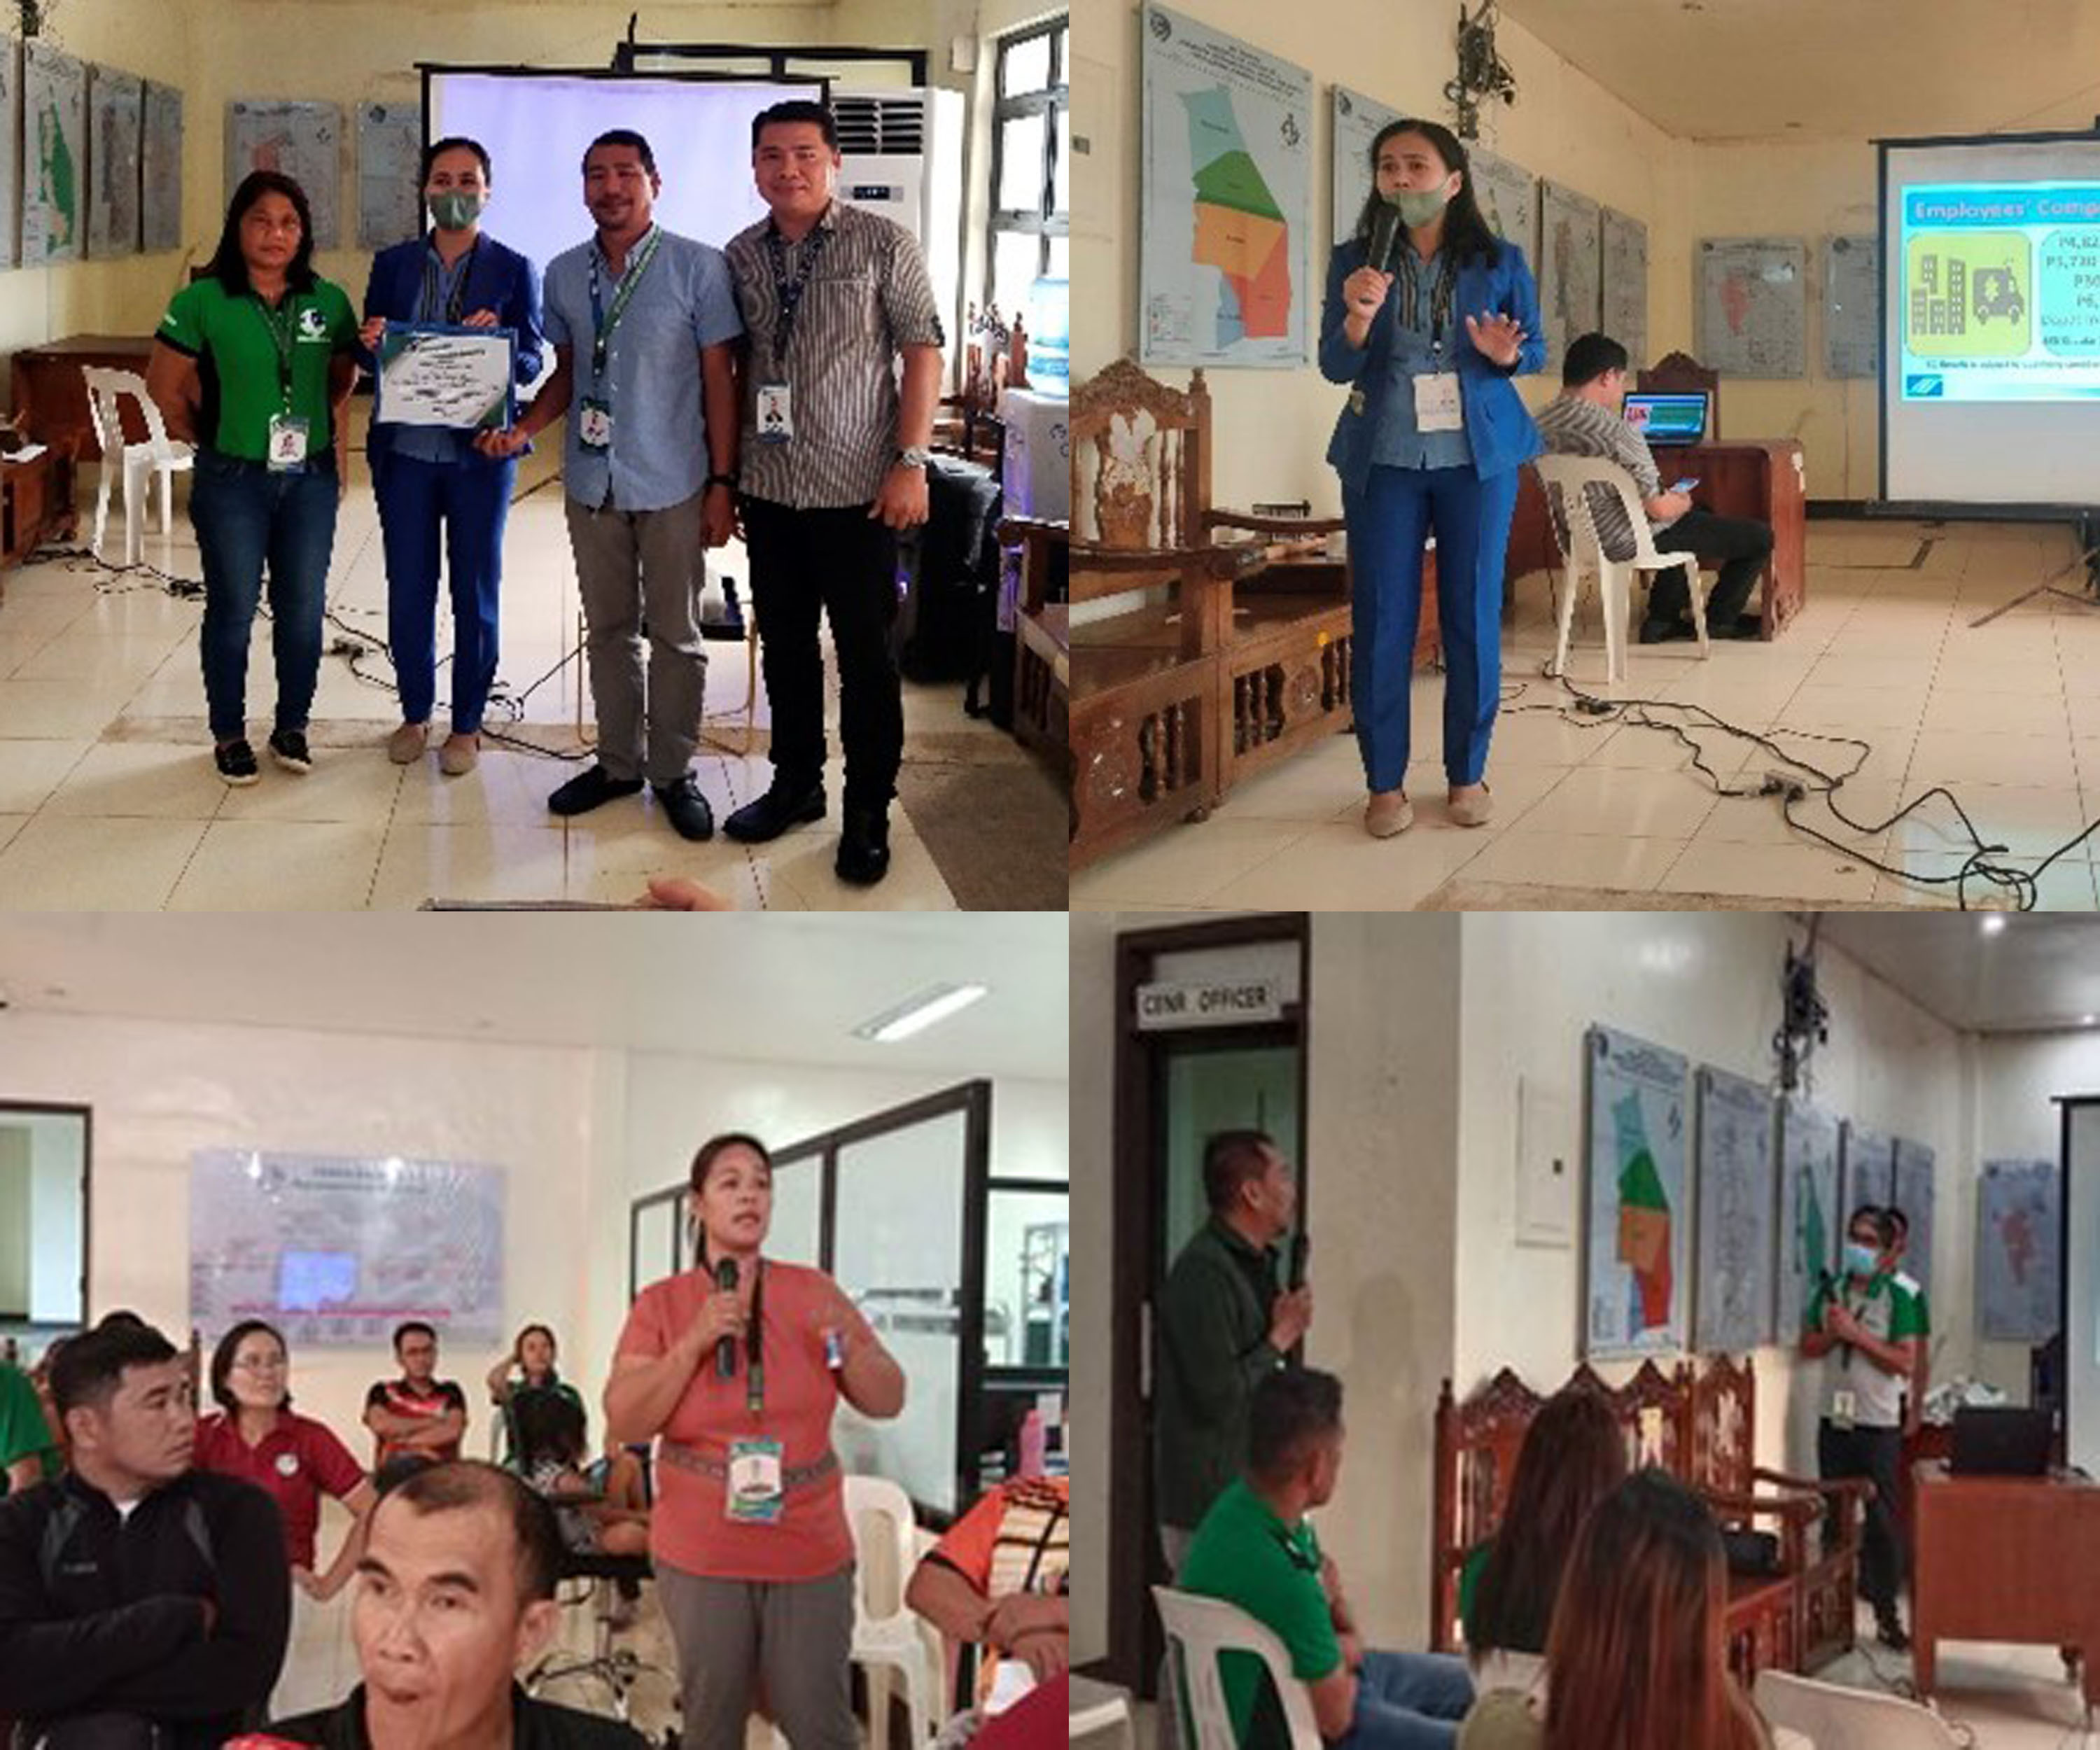 DENR-CENRO Bunawan orients personnel on SSS and PhilHealth benefits